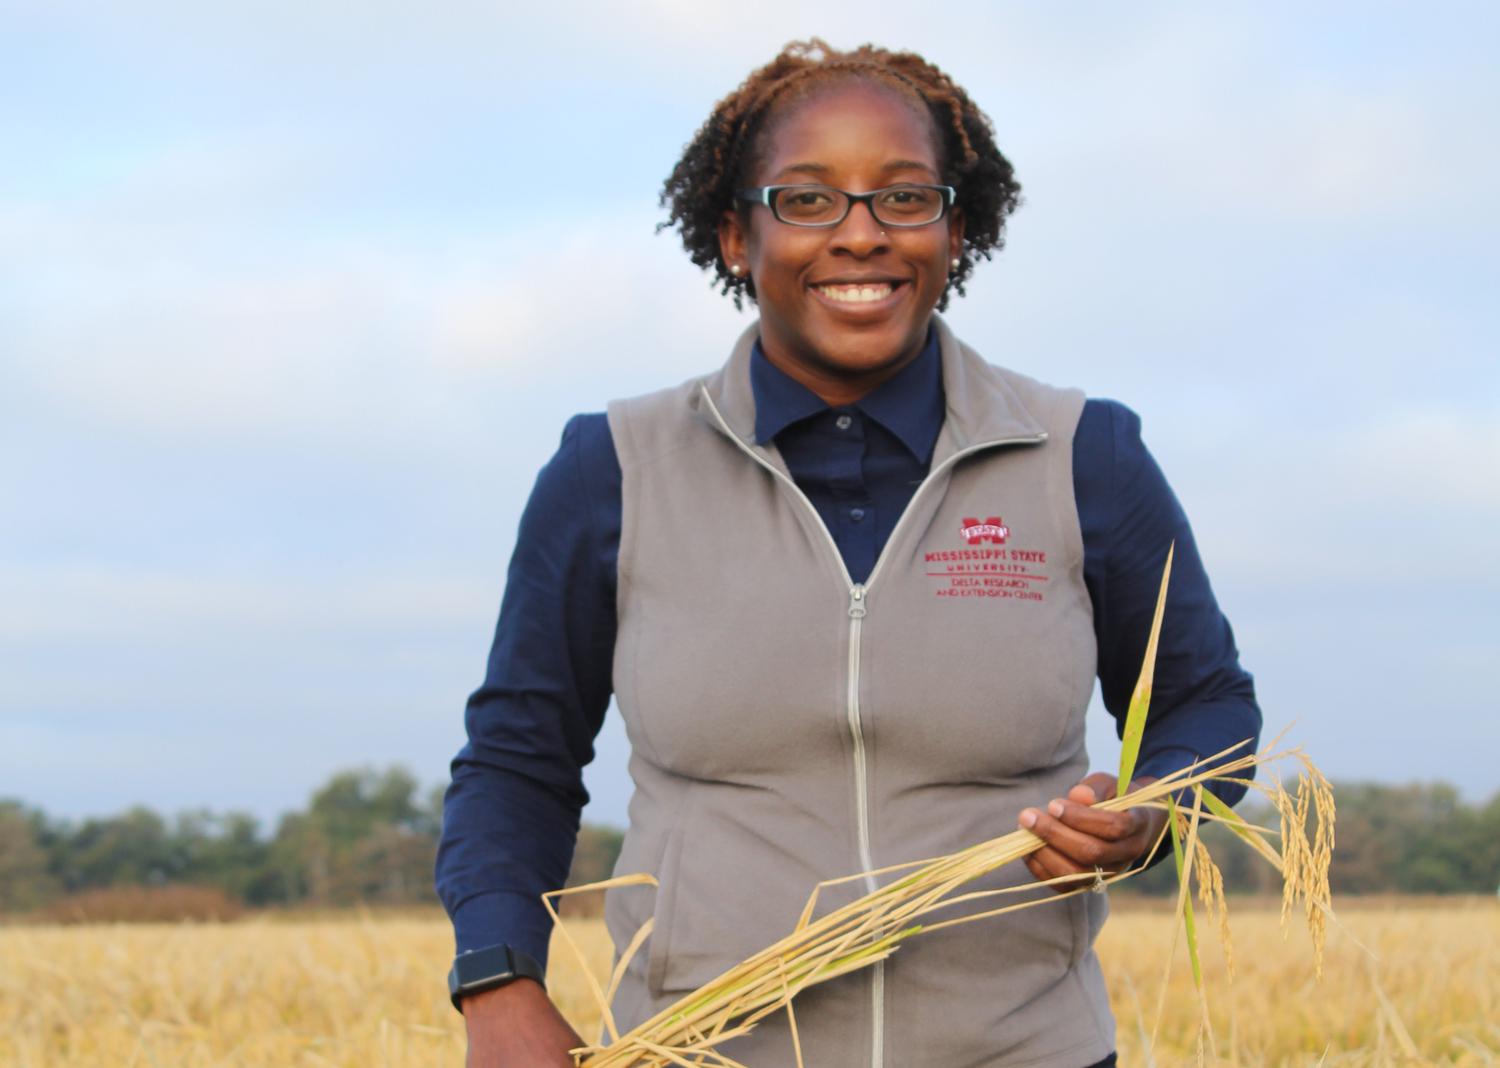 A woman holds a stalk of grain while standing in a field.